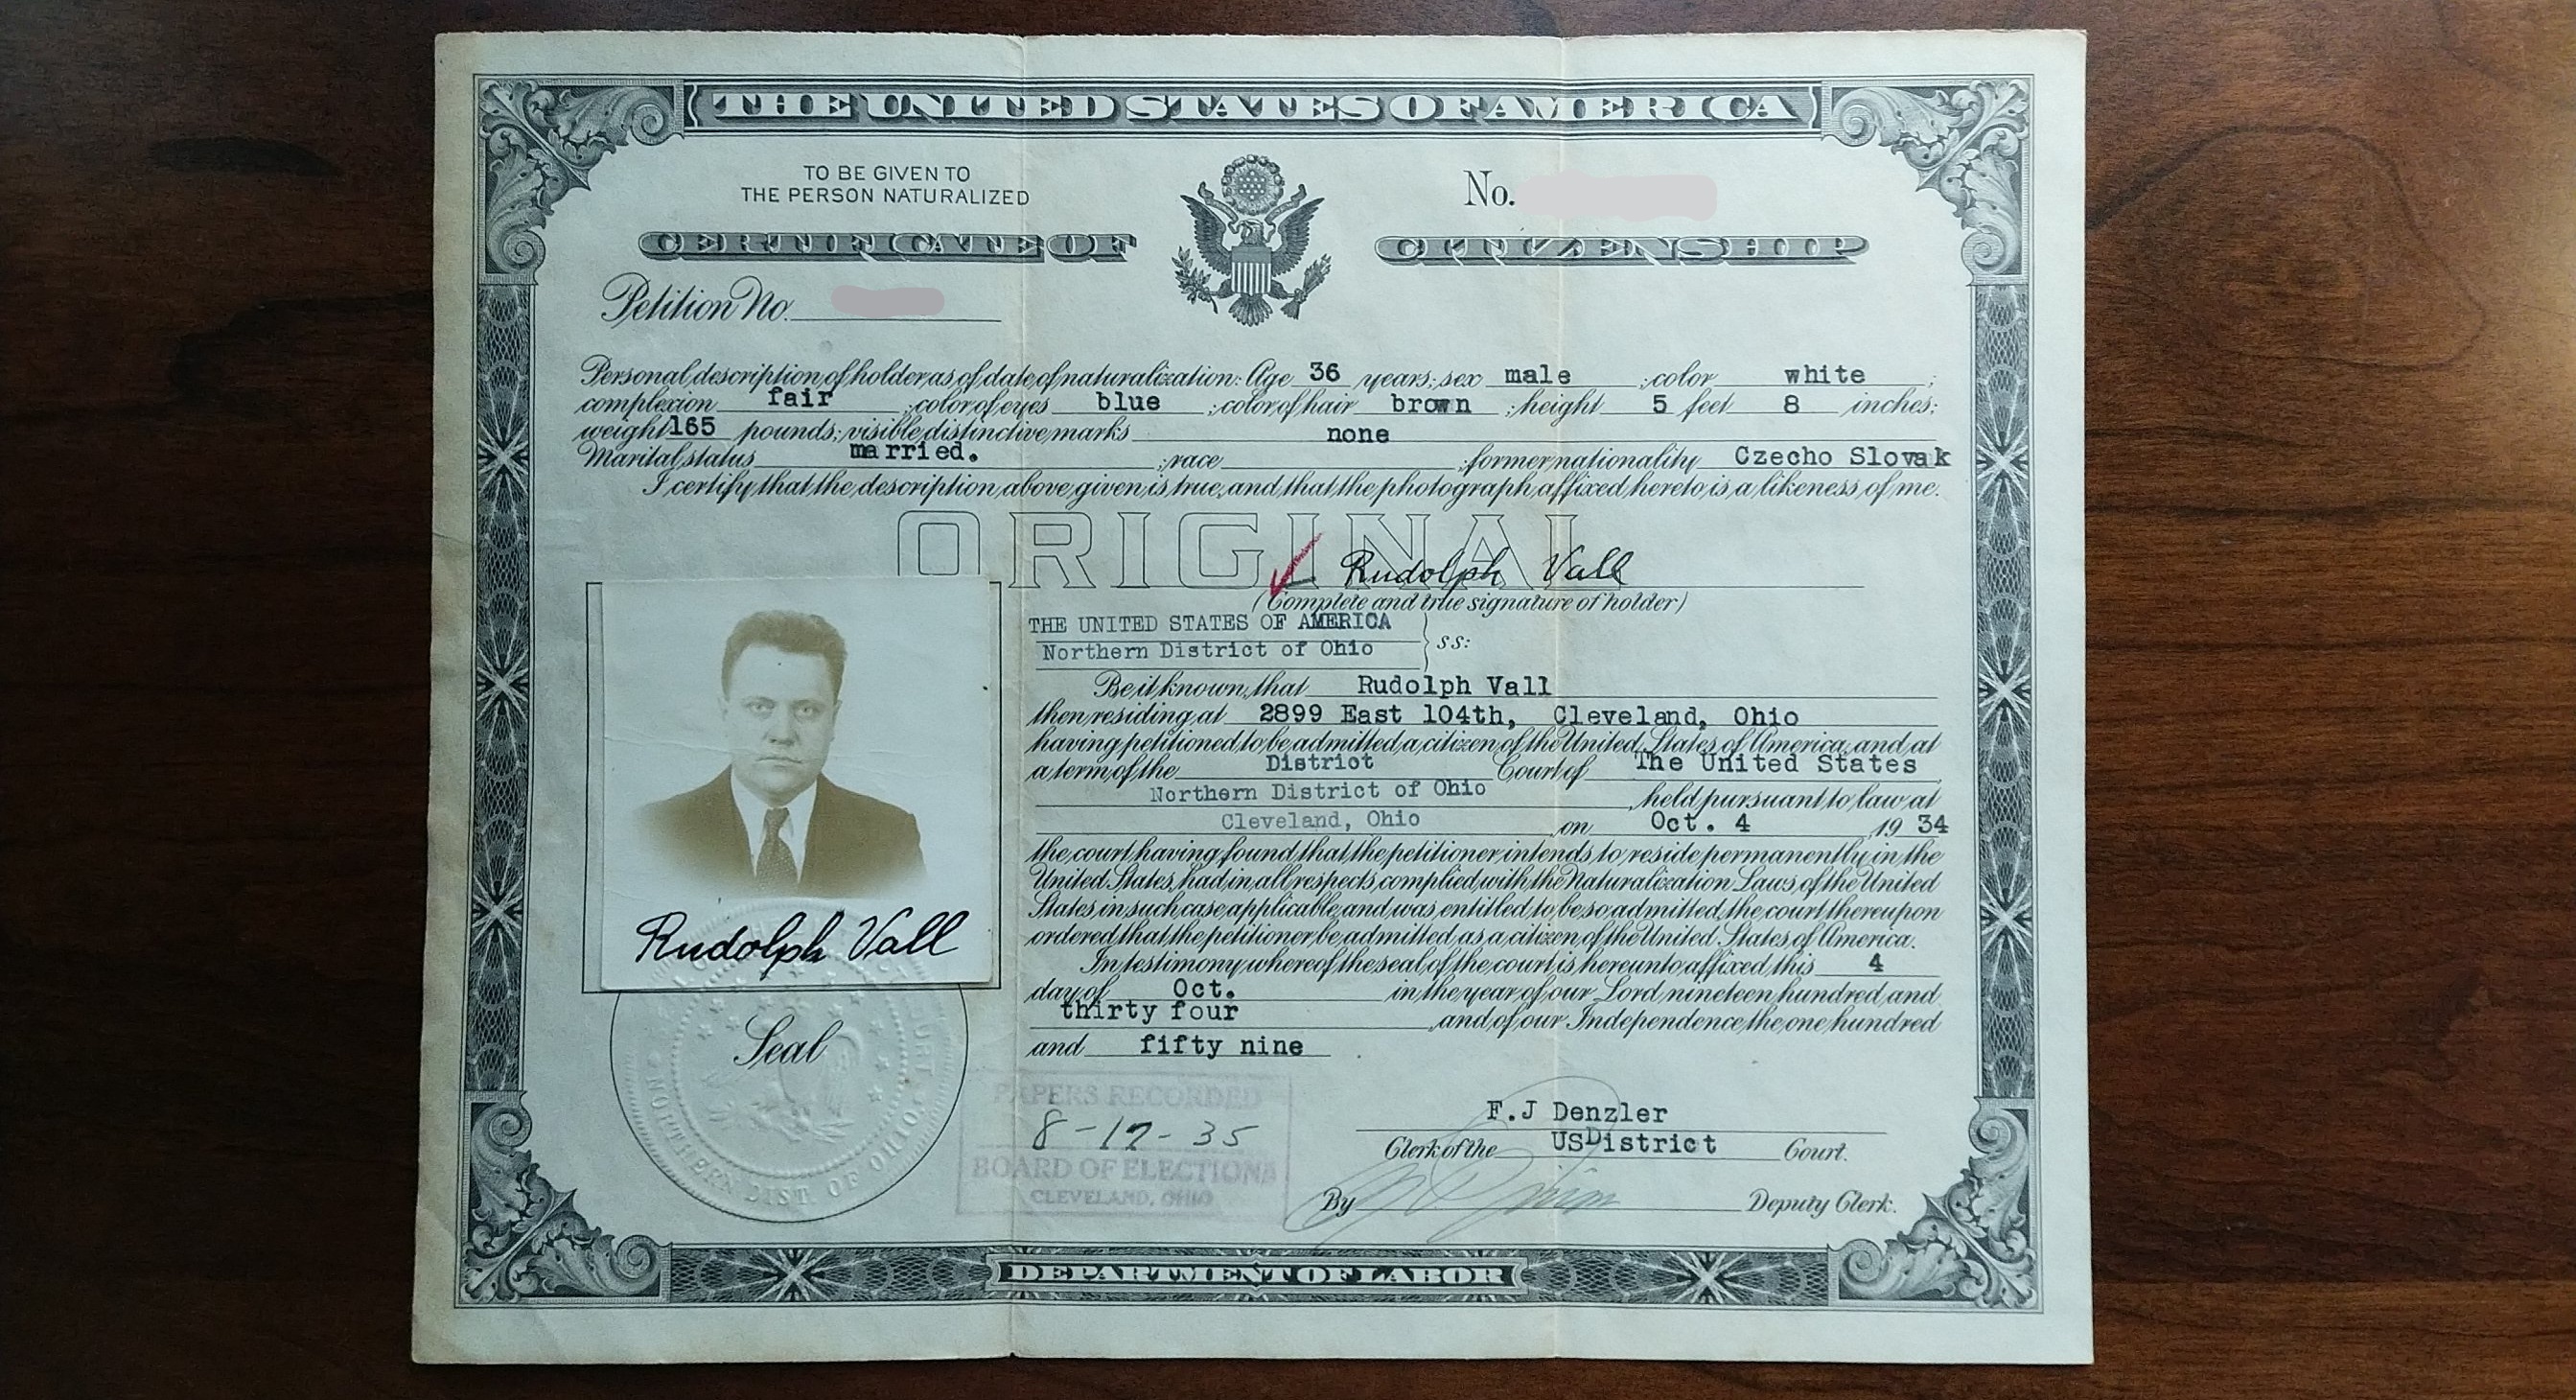 Citizenship Document for Rudolph Vall